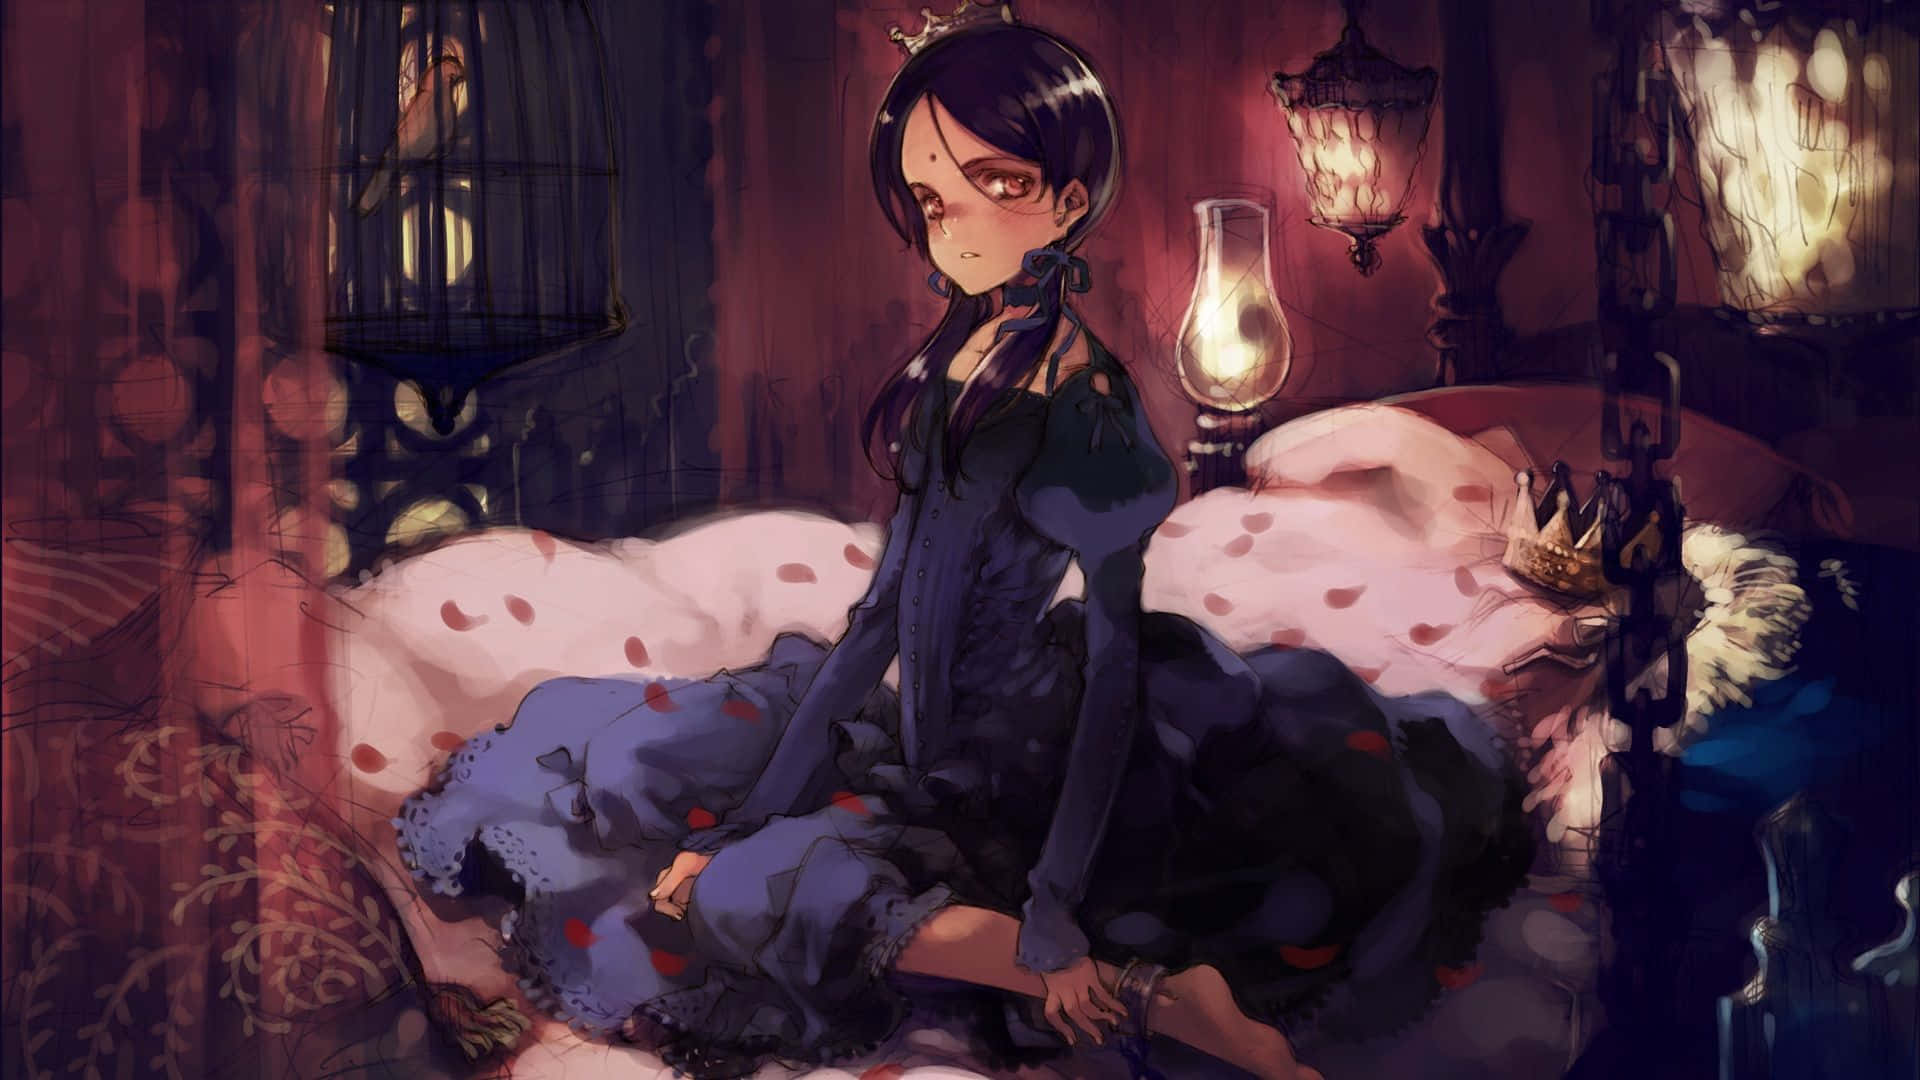 A mysterious emo-gothic Anime girl Wallpaper